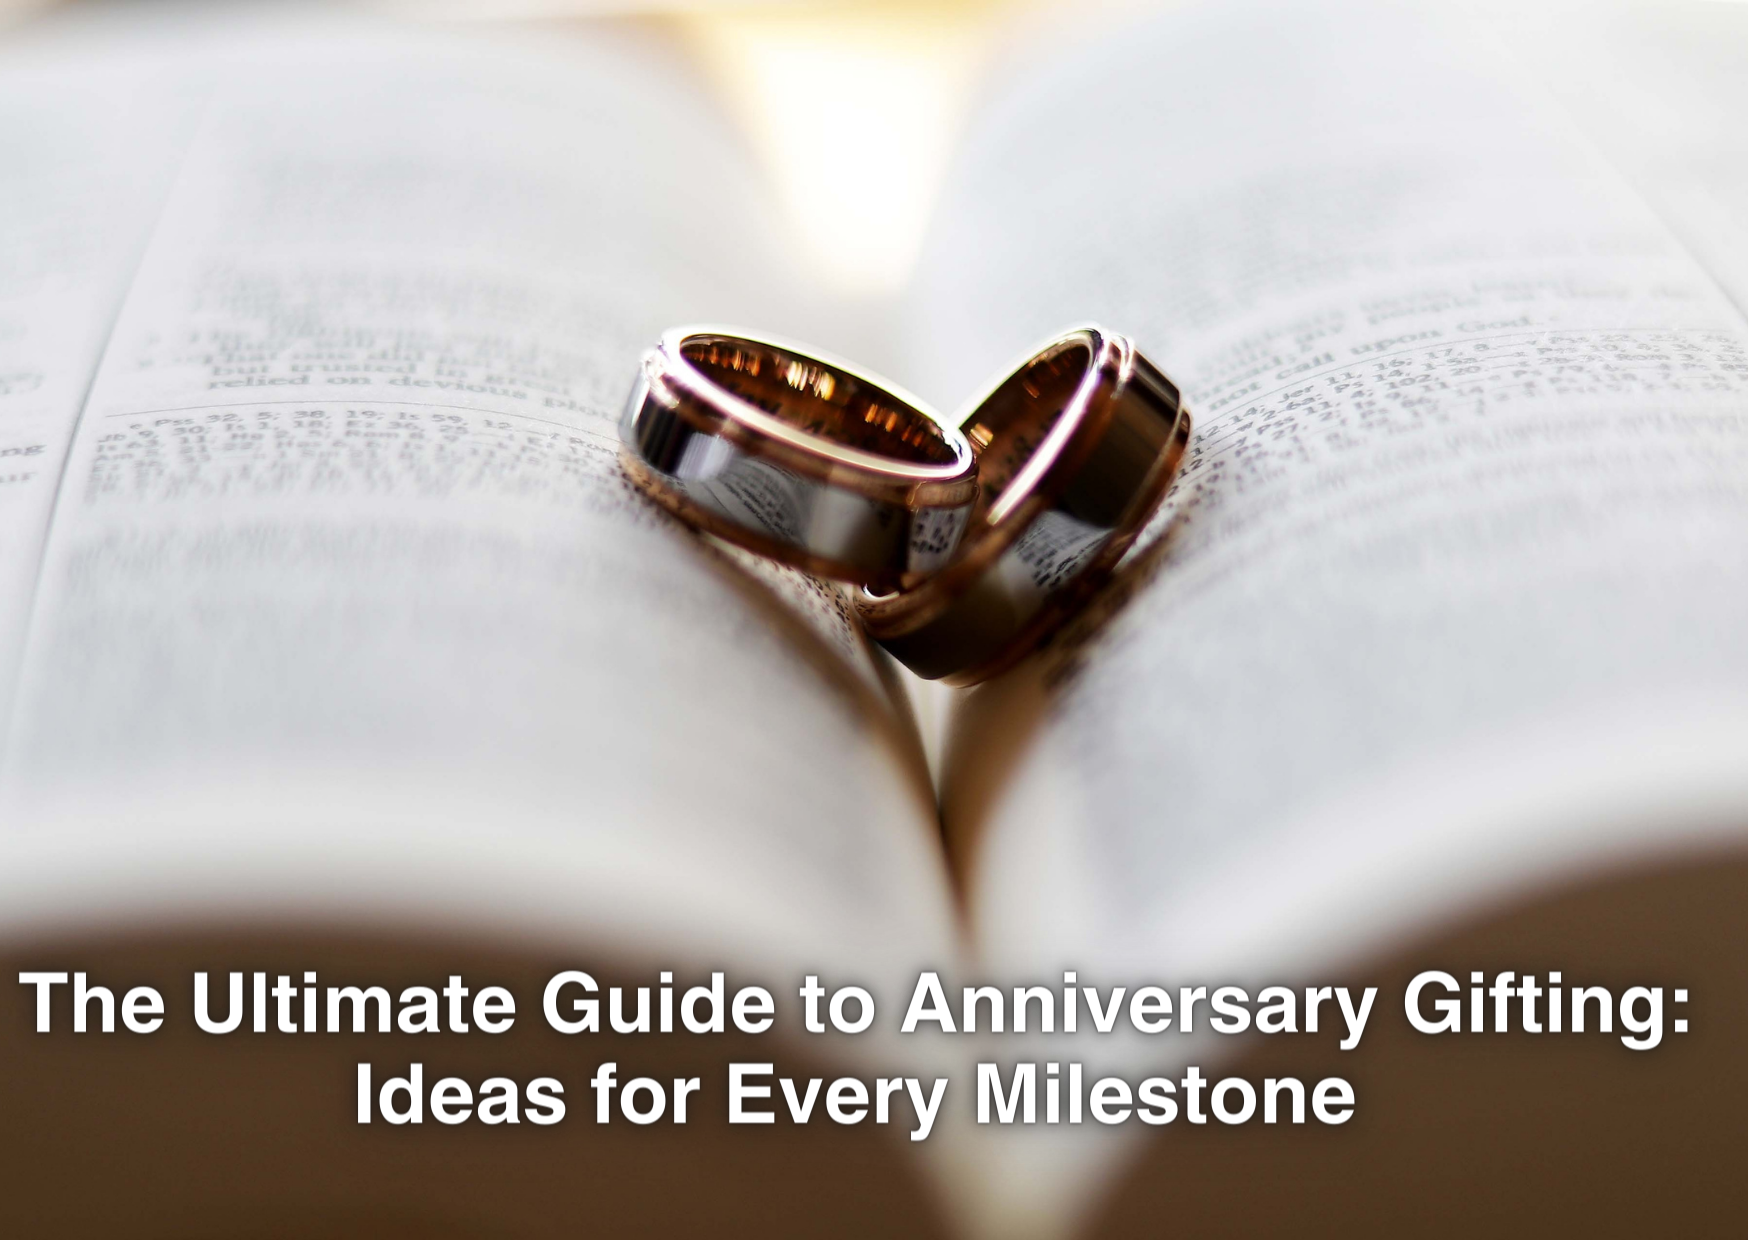 The Ultimate Guide to Anniversary Gifting: Ideas for Every Milestone